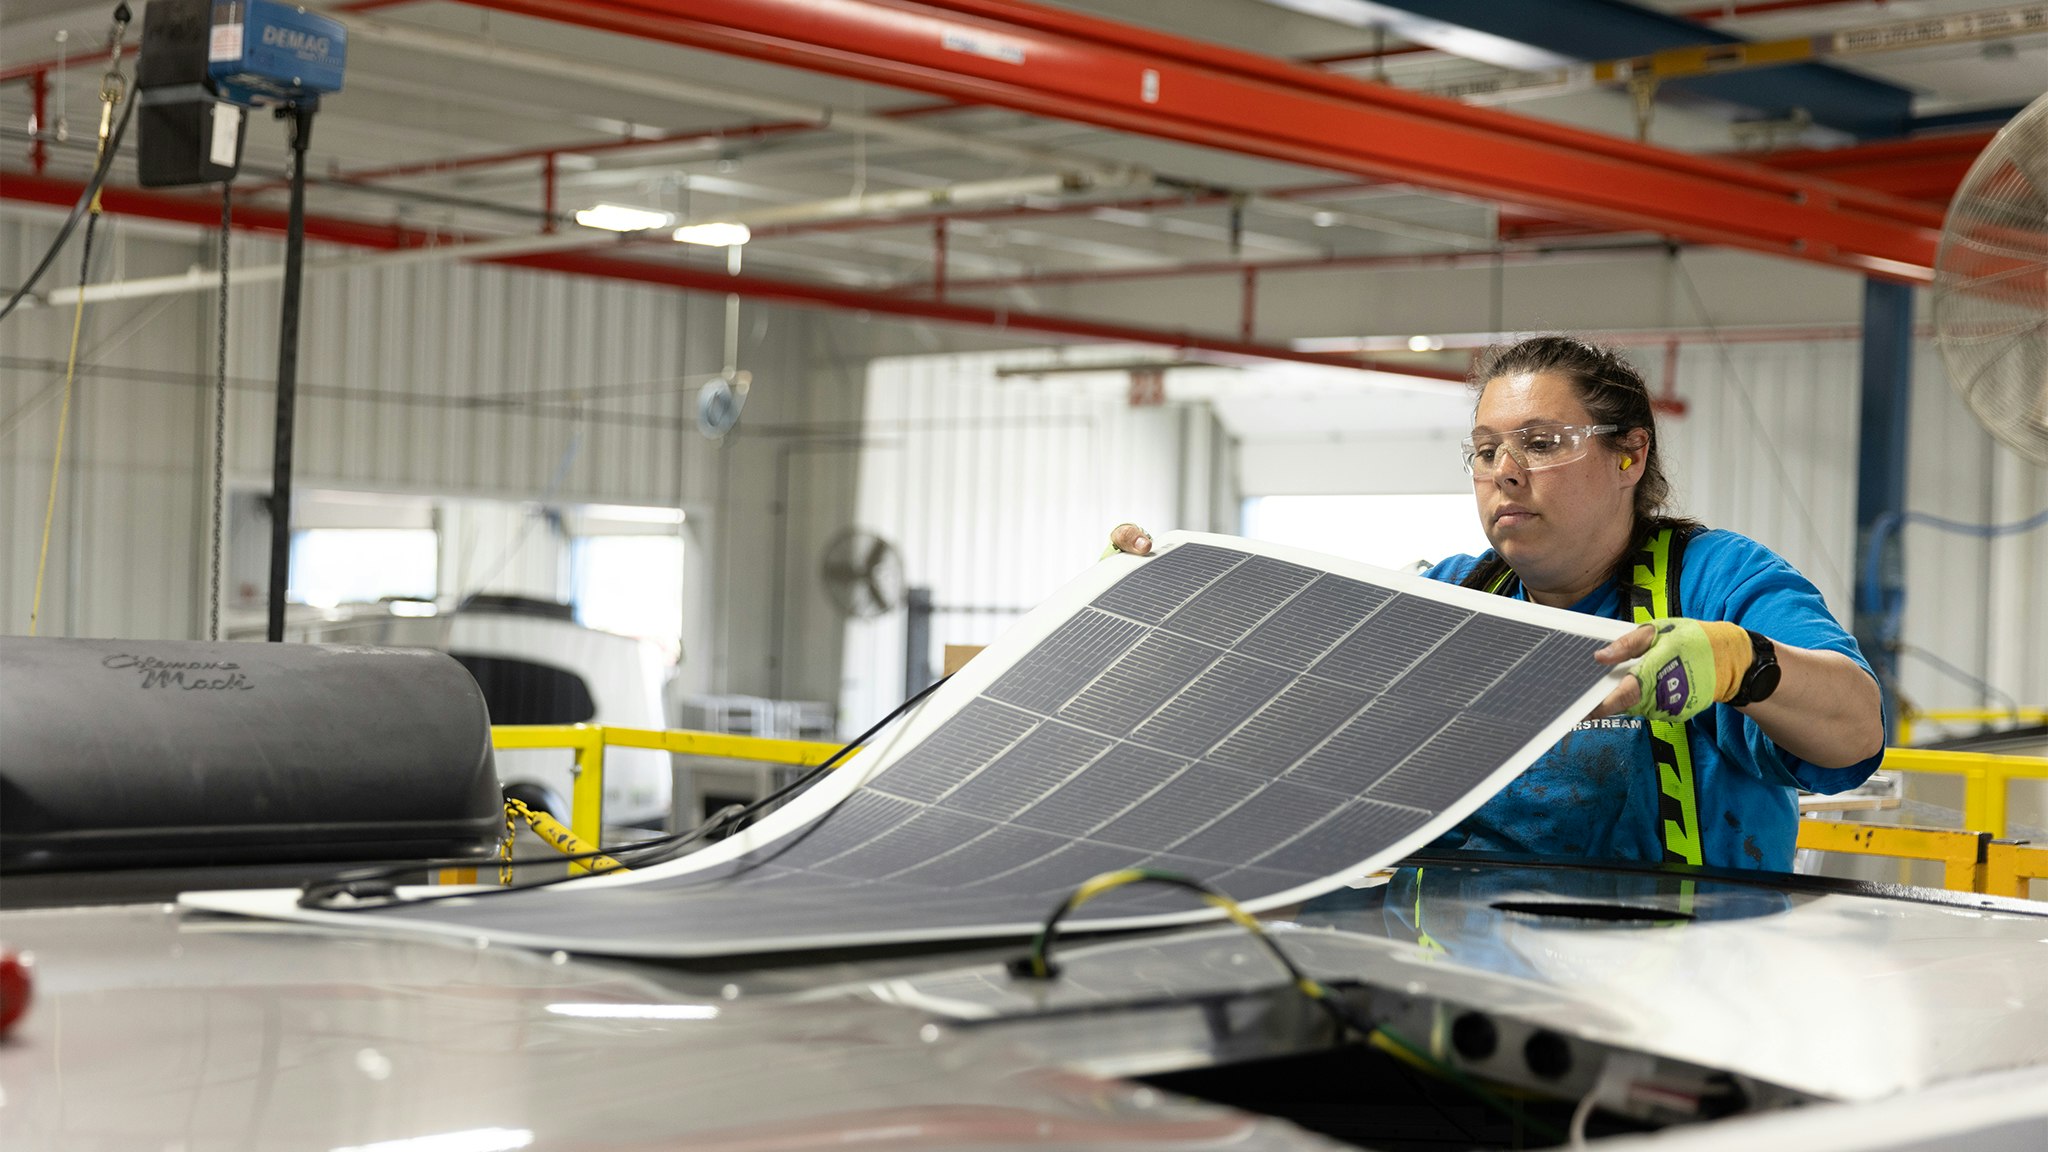 An Airstream employee putting on the solar panels on an Airstream Basecamp travel trailer in Ohio.